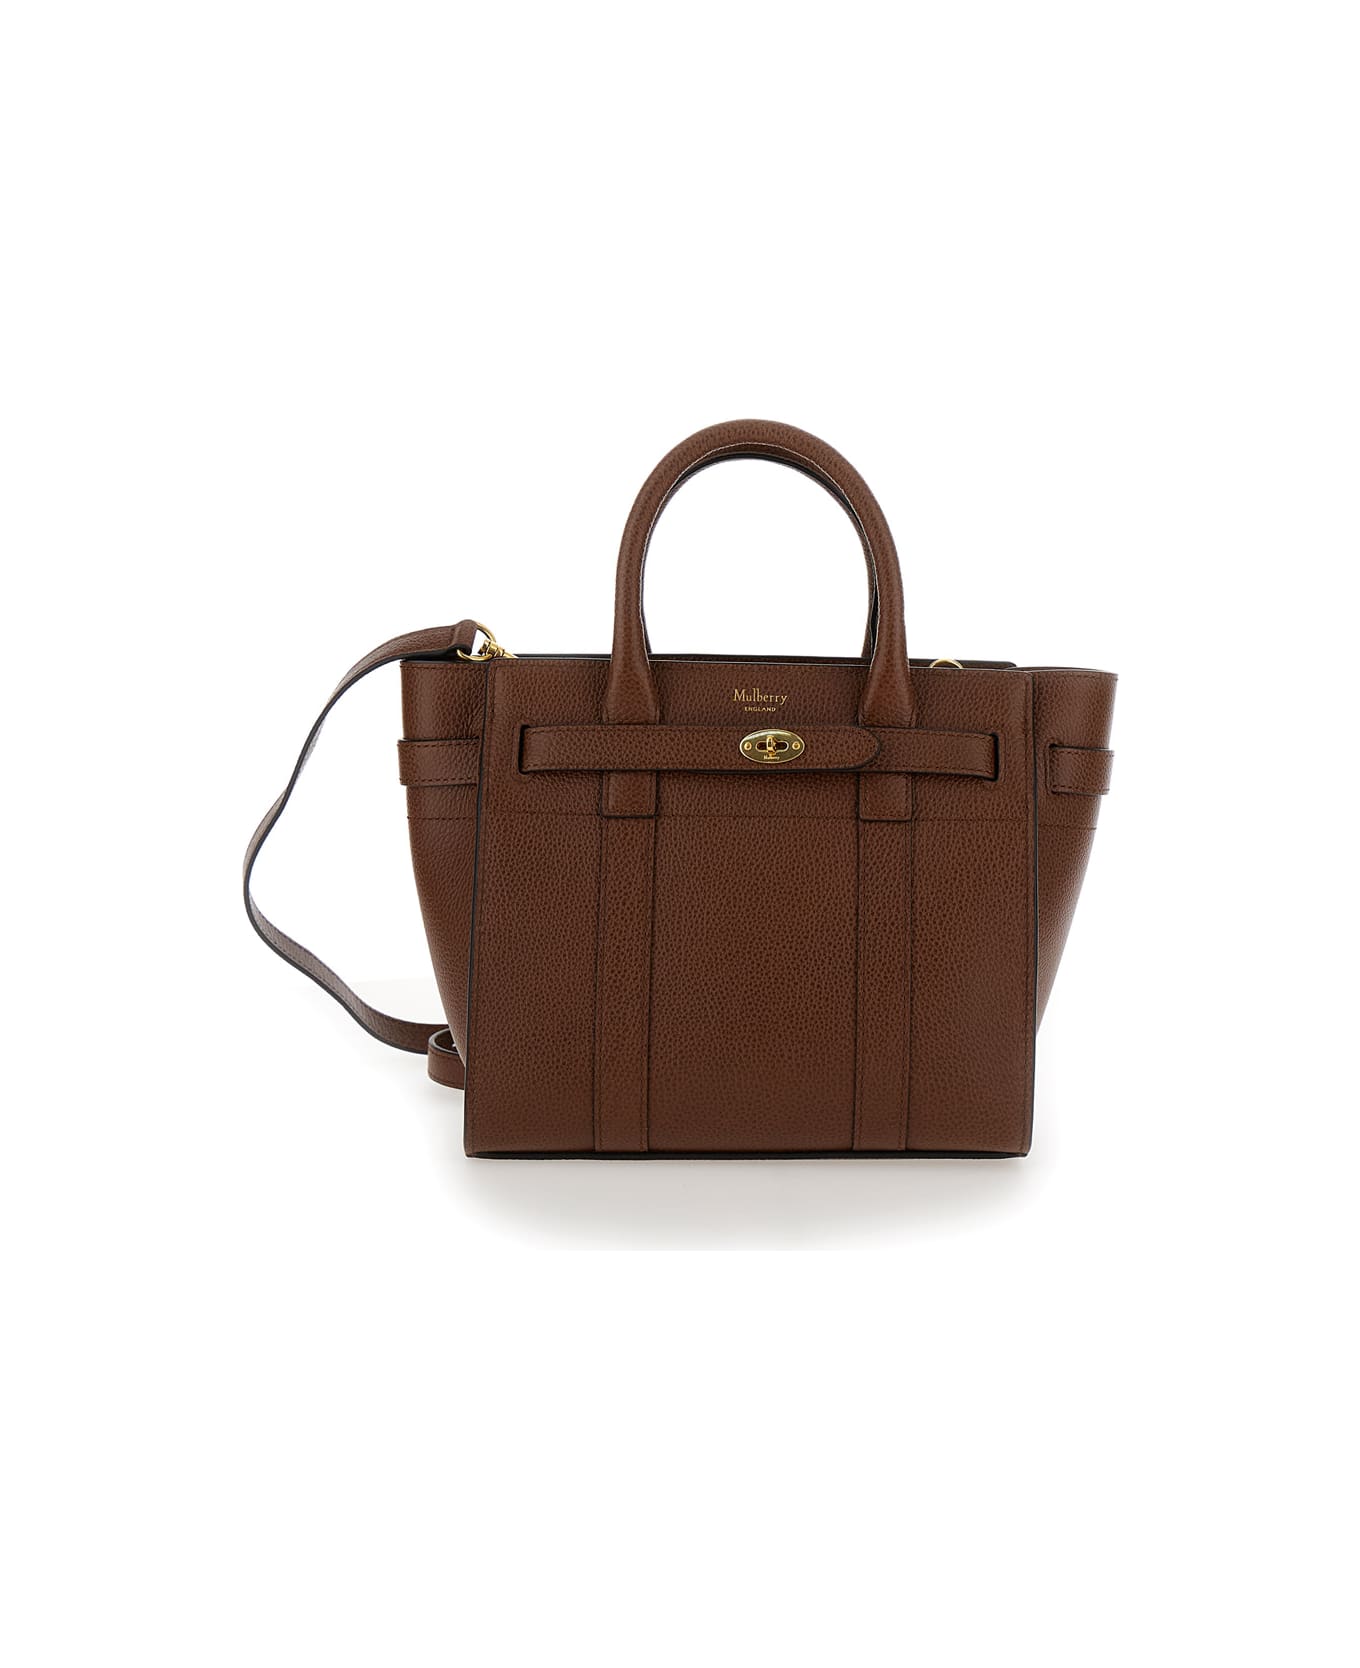 Mulberry 'mini Bayswater' Brown Crossbody Bag With Laminated Logo In Grained Leather Woman - Brown